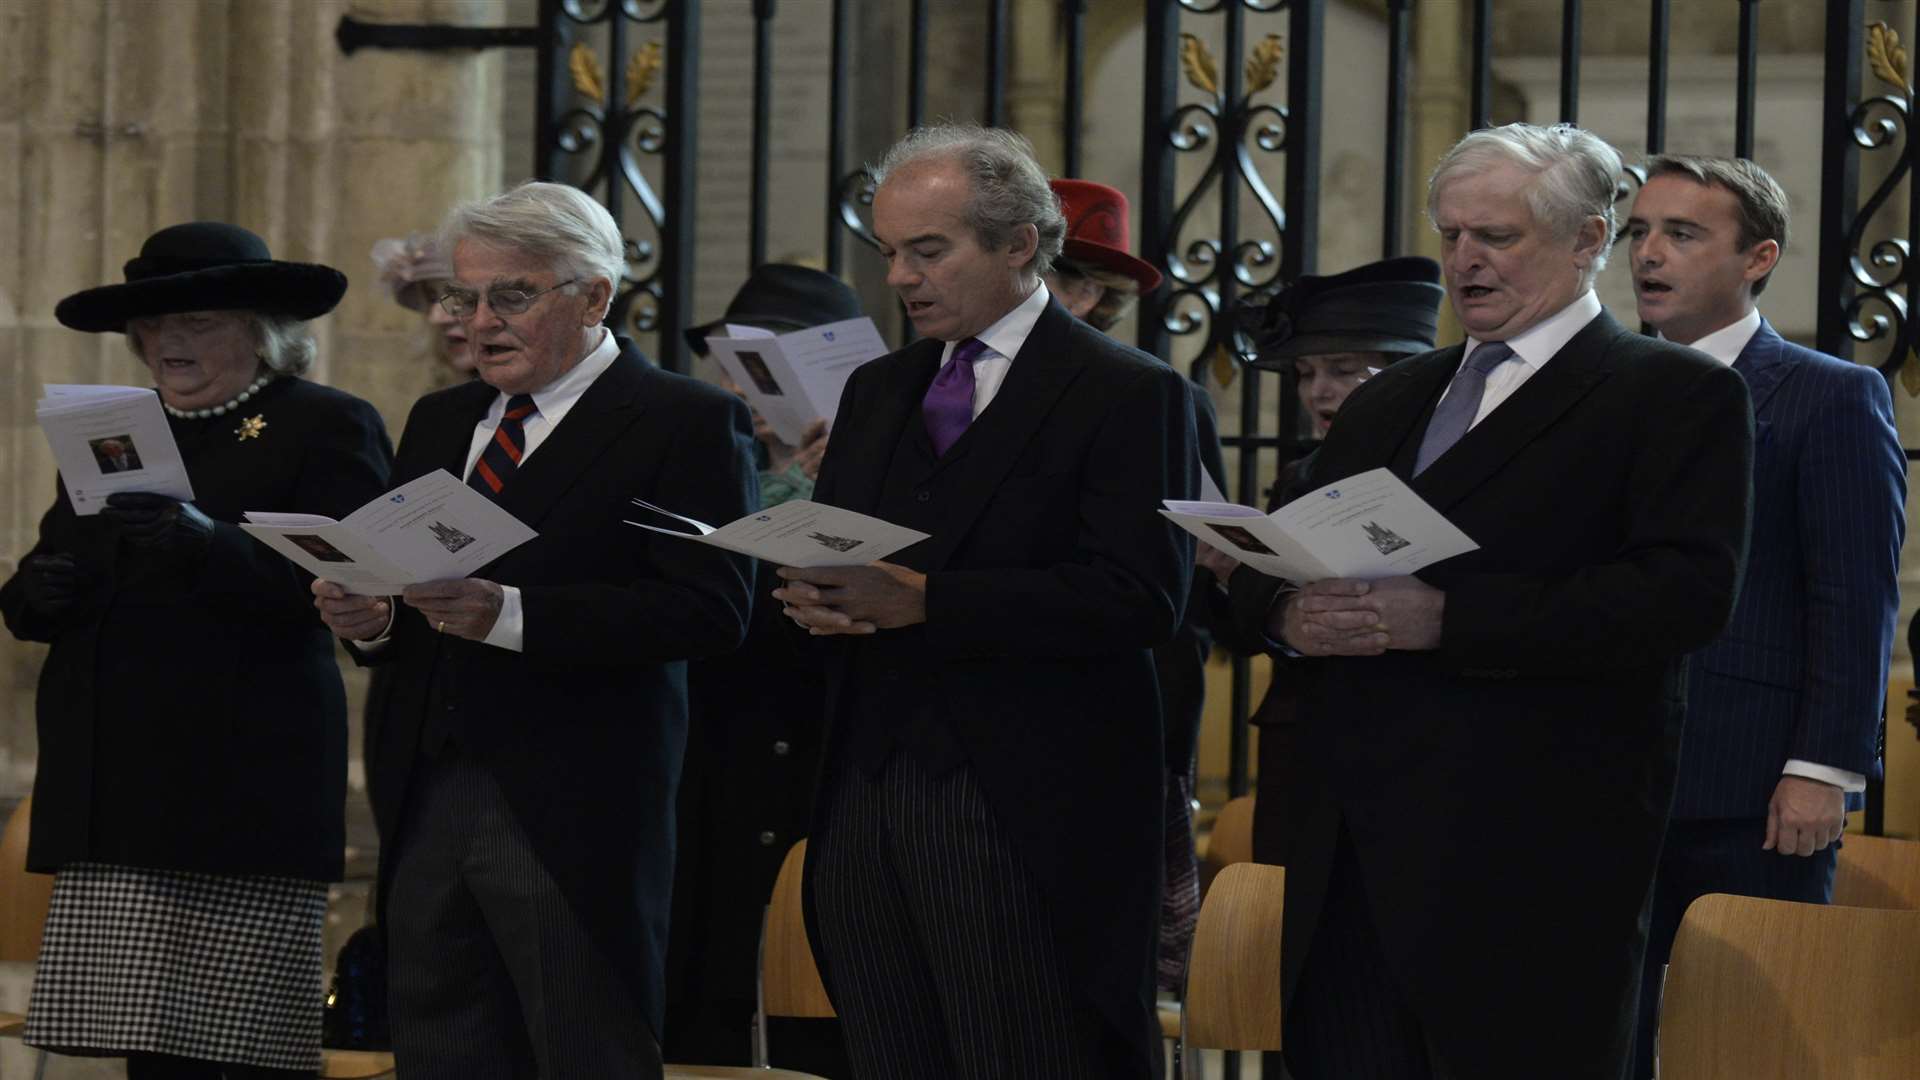 Guests at the memorial service for Lord Lt Allan Willett